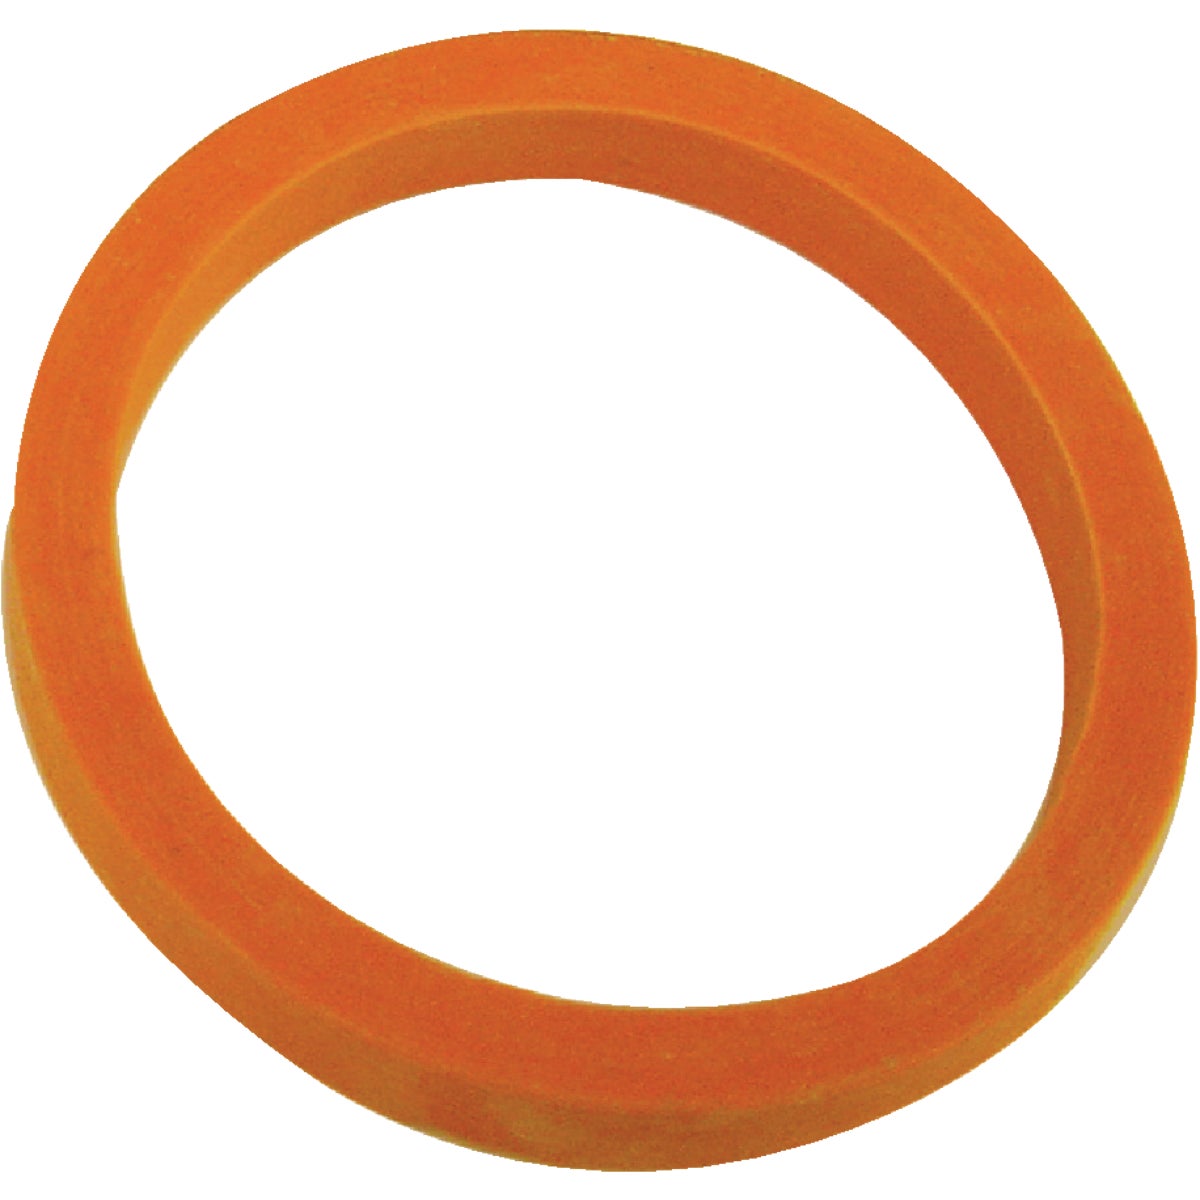 Item 494674, Washer forms a seal between the nut and pipe fitting to help prevent leaks